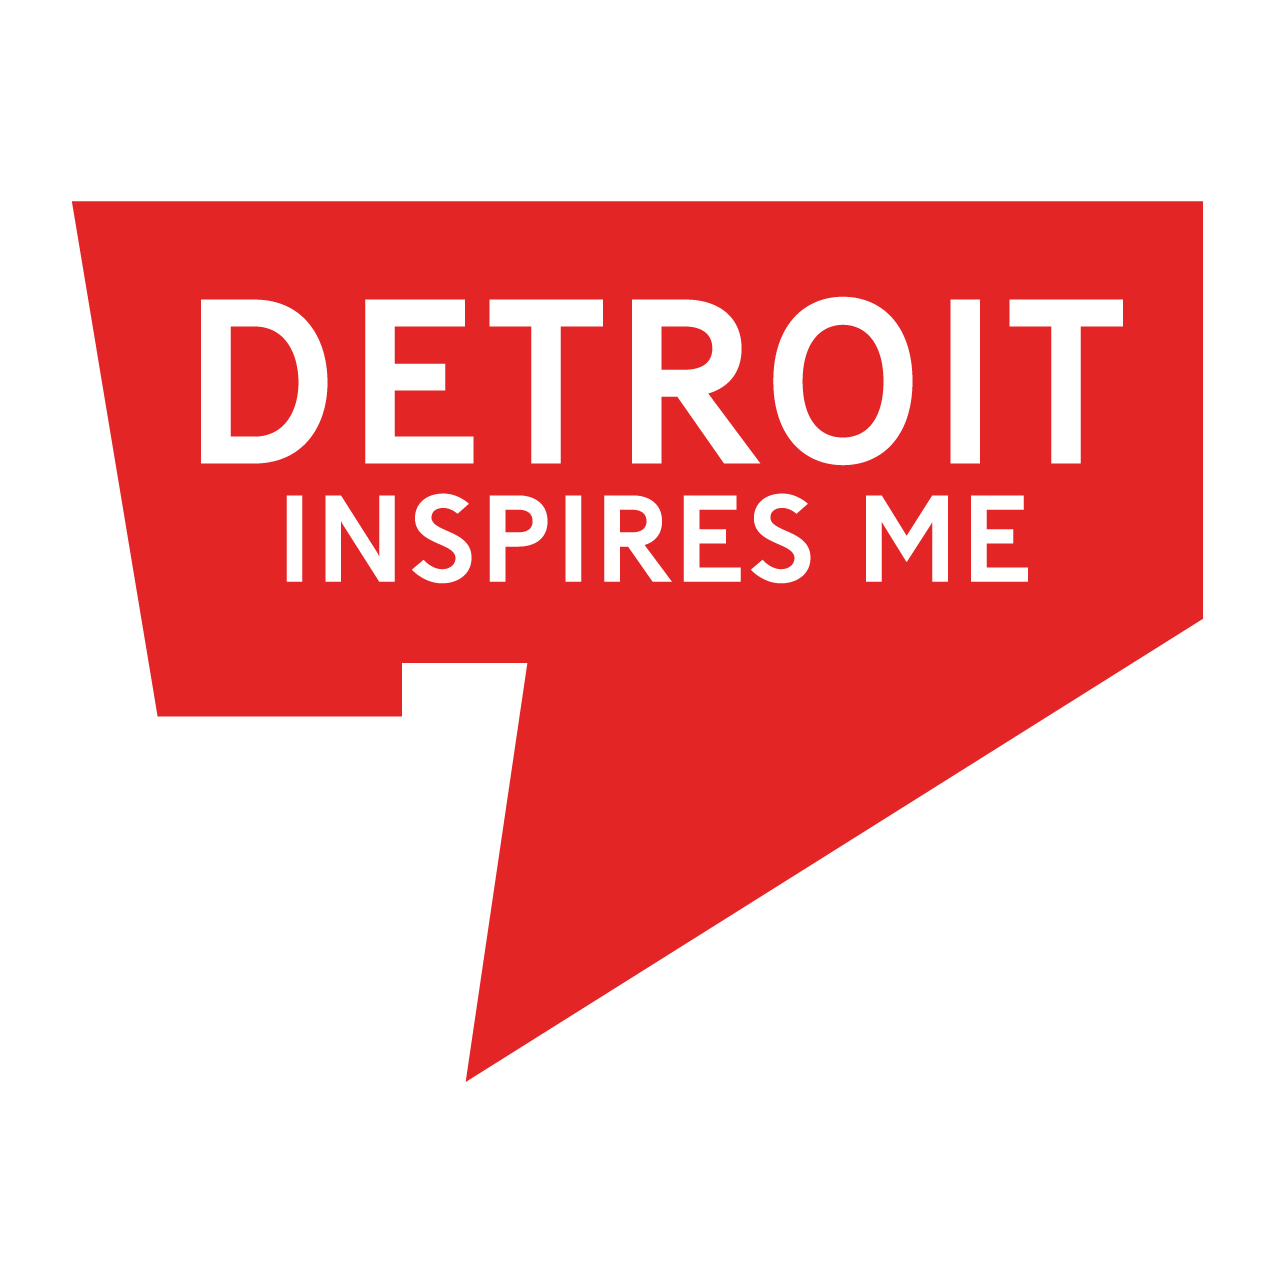 Why “Detroit Inspires Me”